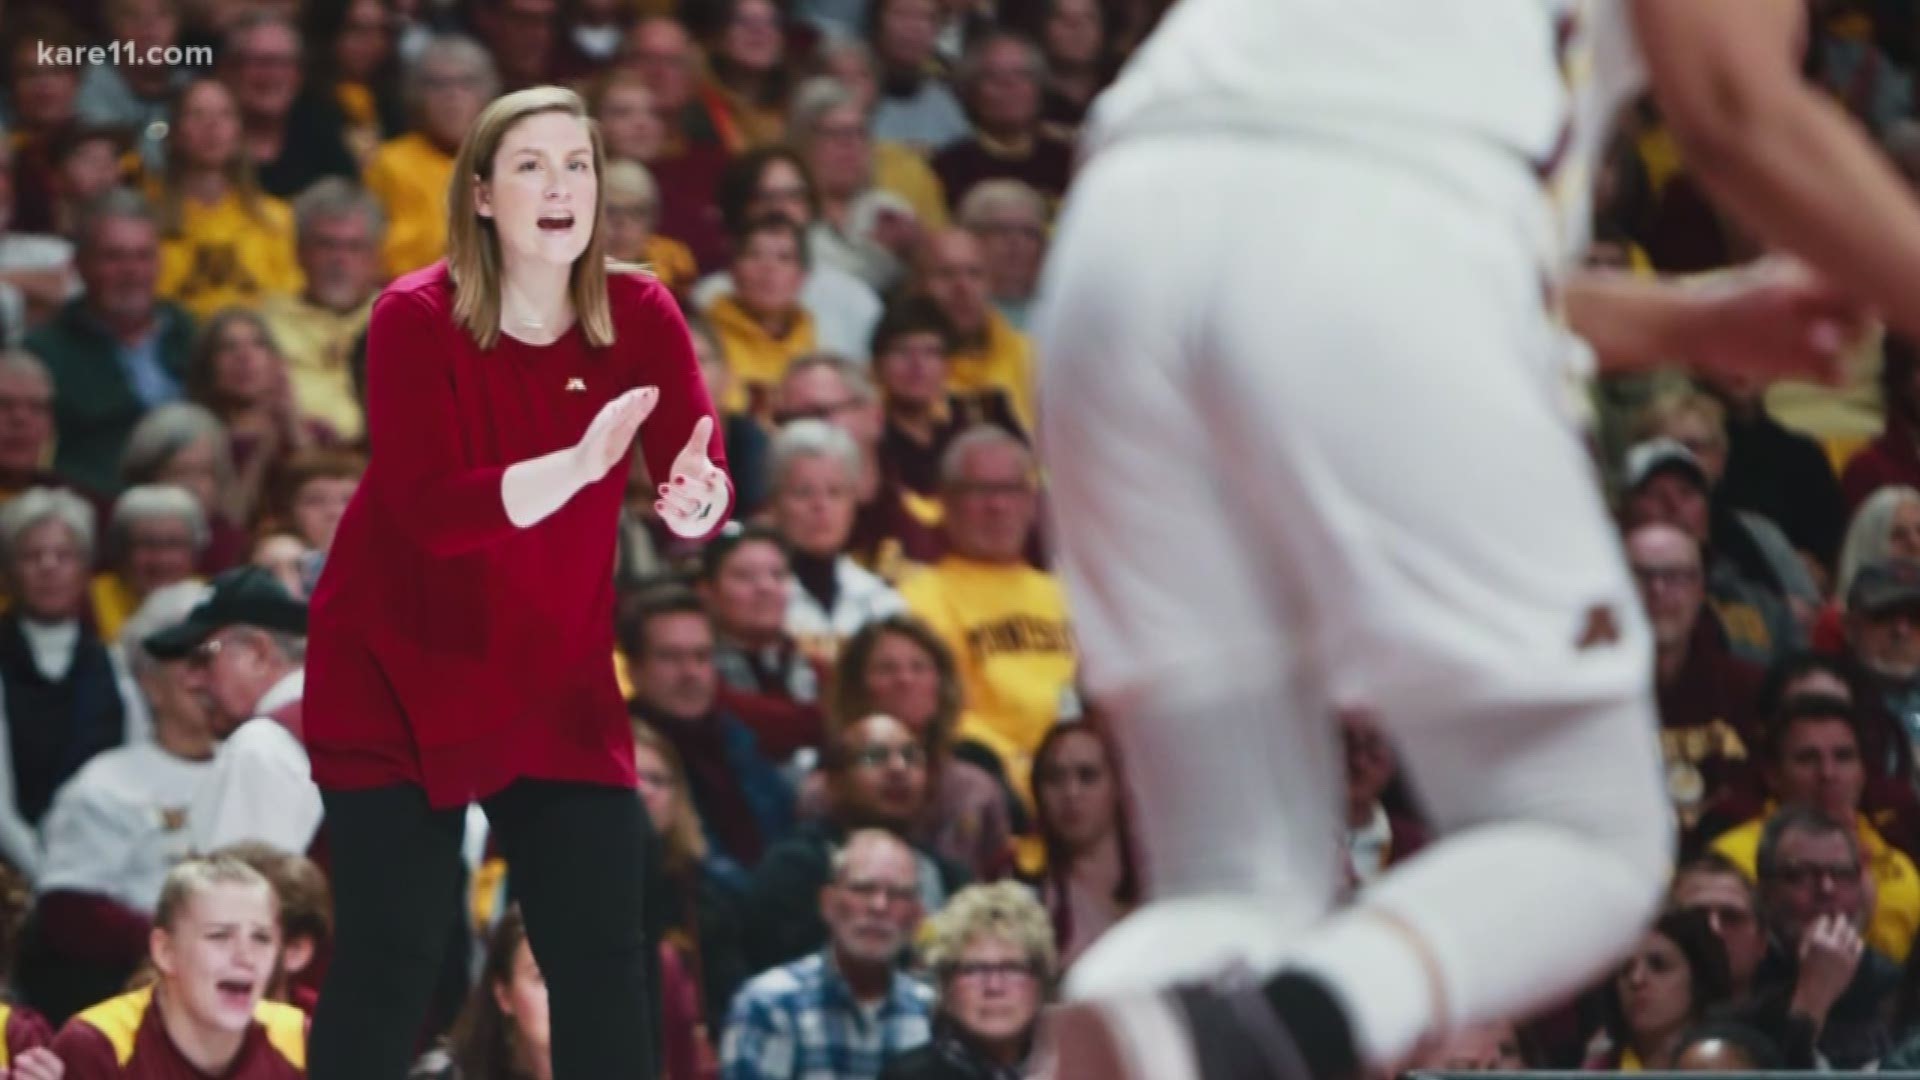 A sold out crowd packed Williams Arena to see the Gopher women's basketball team play with Lindsay Whalen on the court -- this time as head coach.